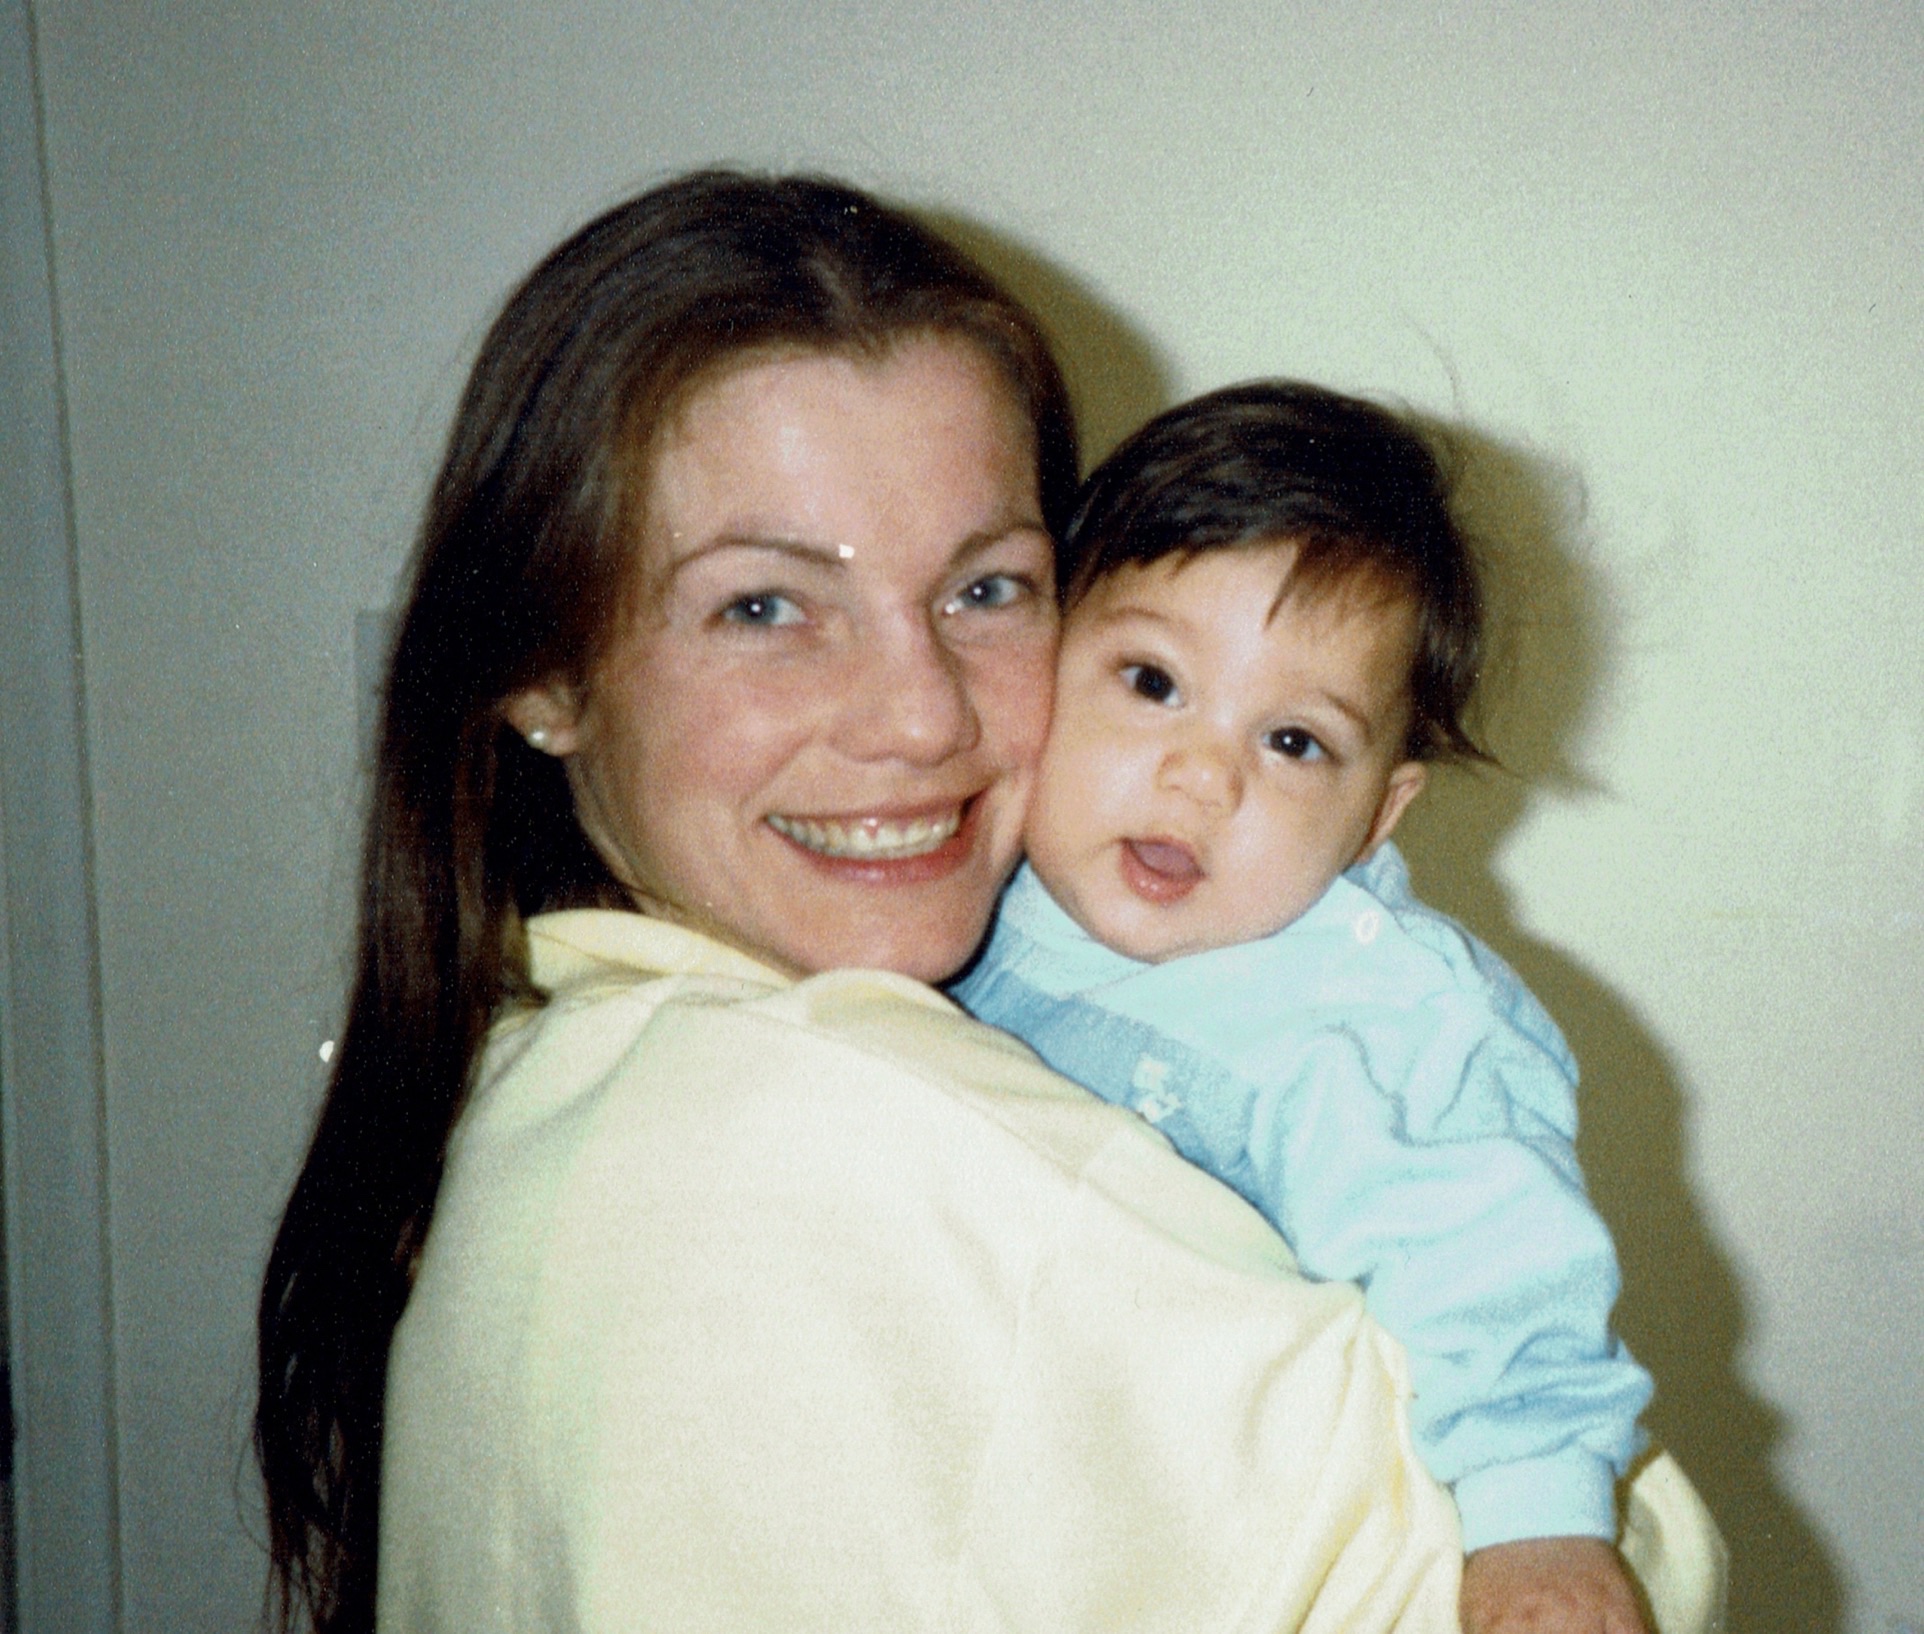 My mother aged ~27 holding a ~1 year old baby me with a massive grin on her face.